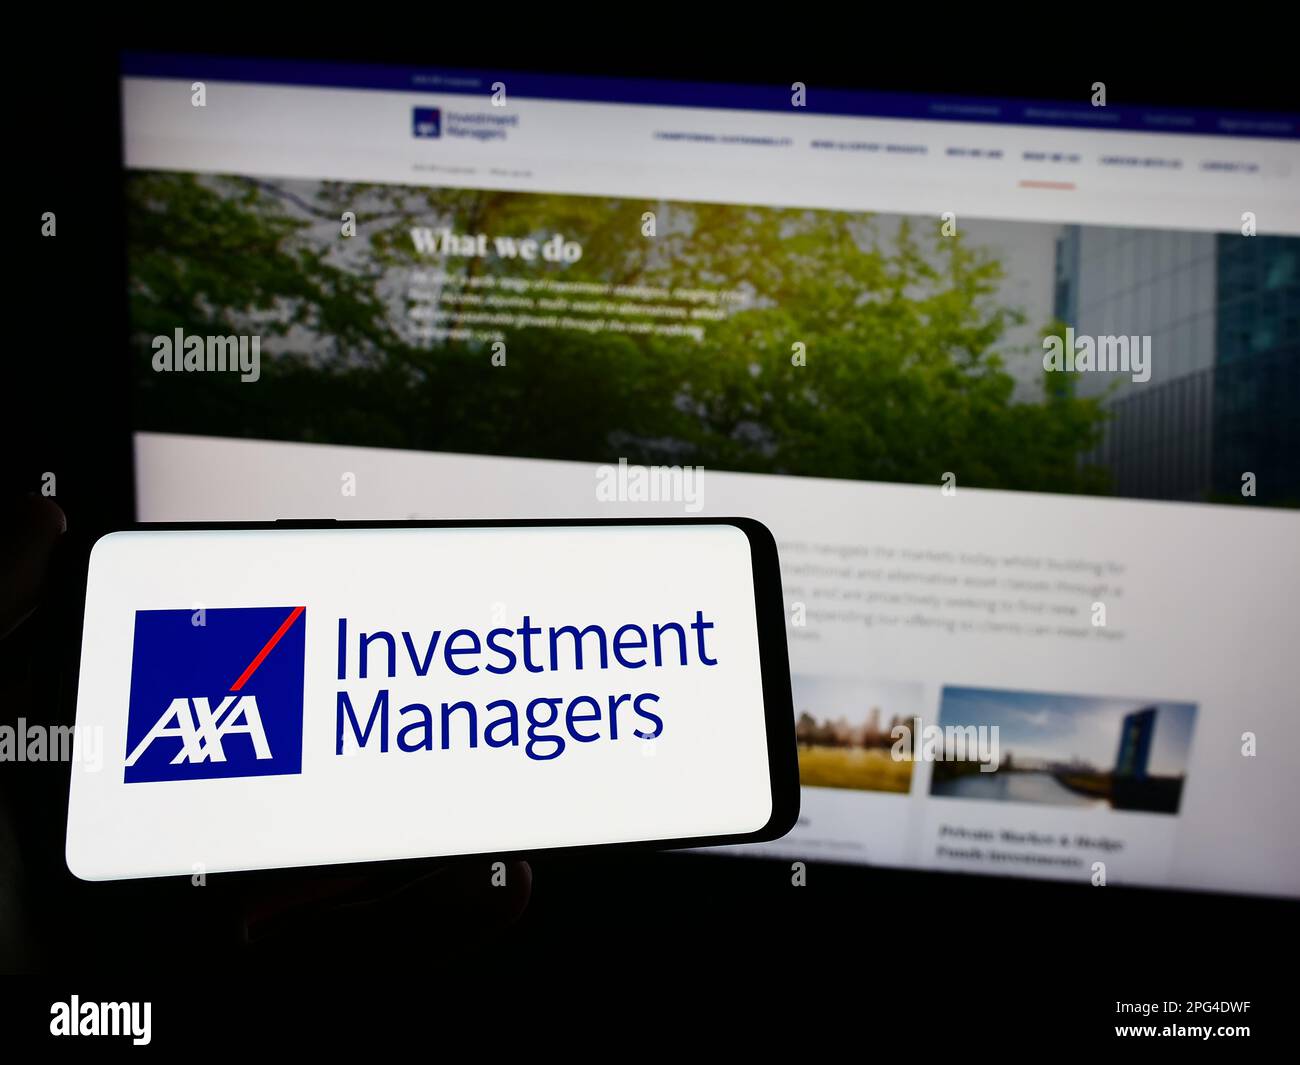 Person holding smartphone with logo of investment company Axa Investment Managers on screen in front of website. Focus on phone display. Stock Photo